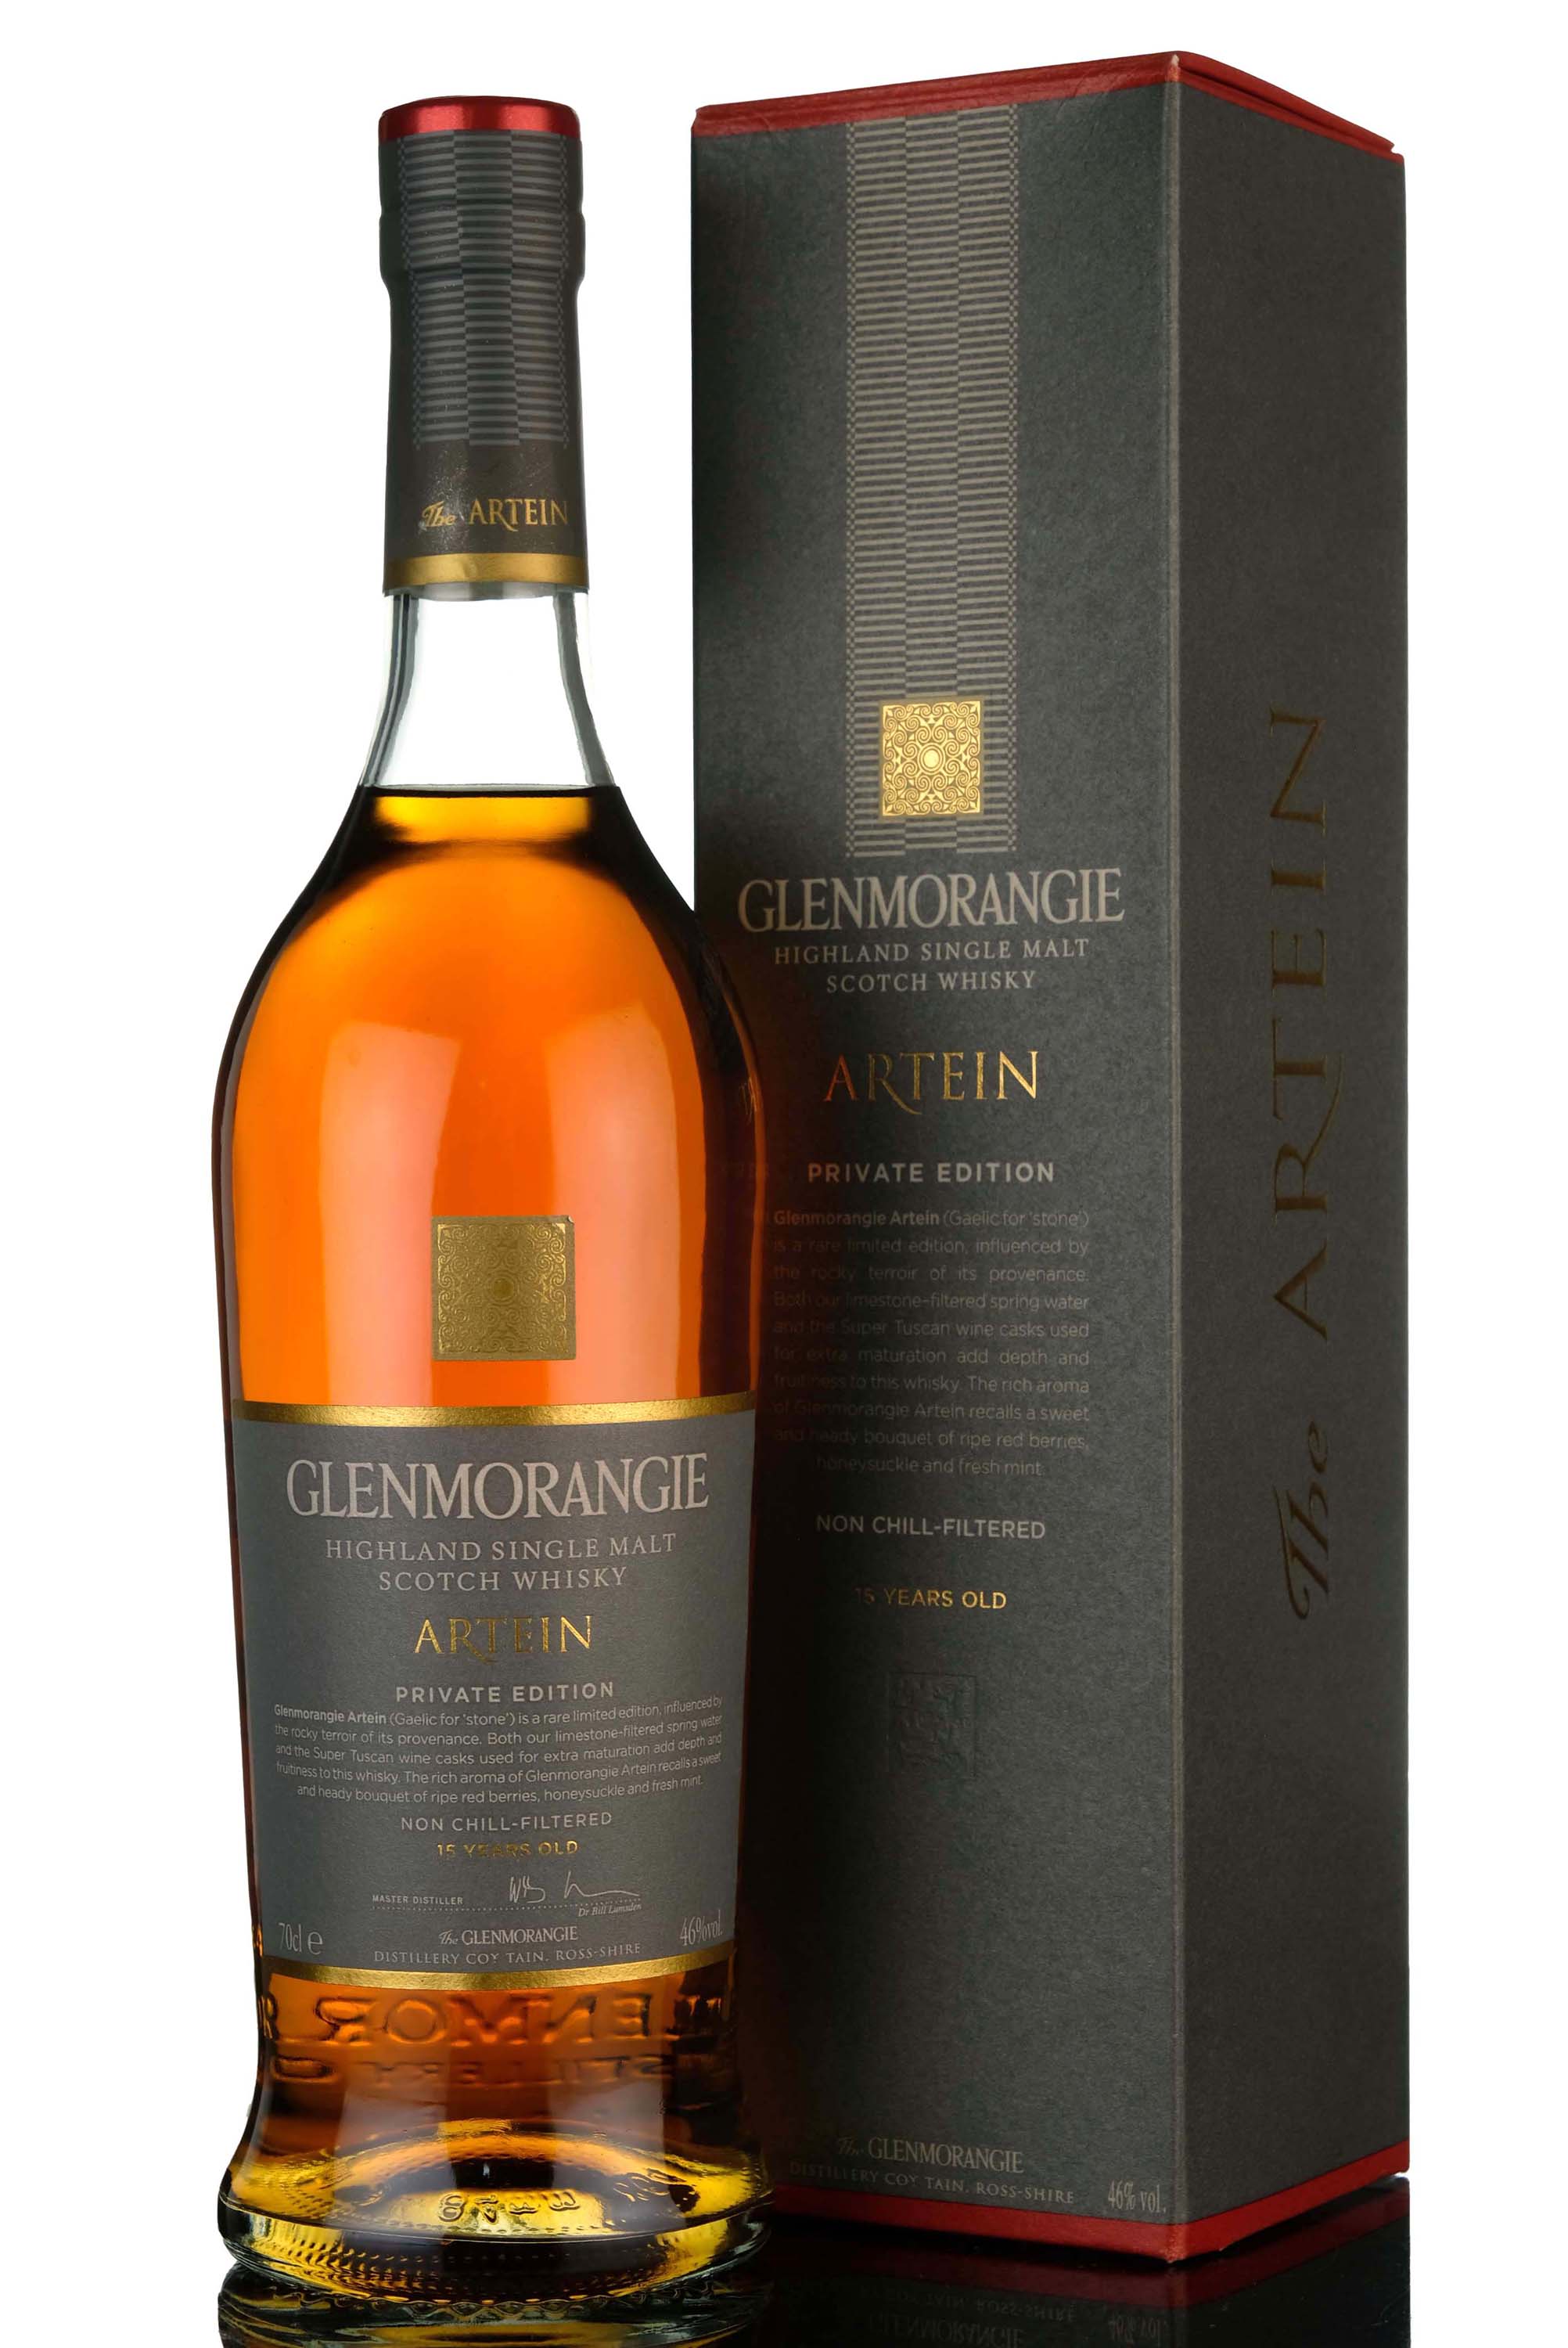 Glenmorangie 15 Year Old - Private Edition Artein - 2011 Release